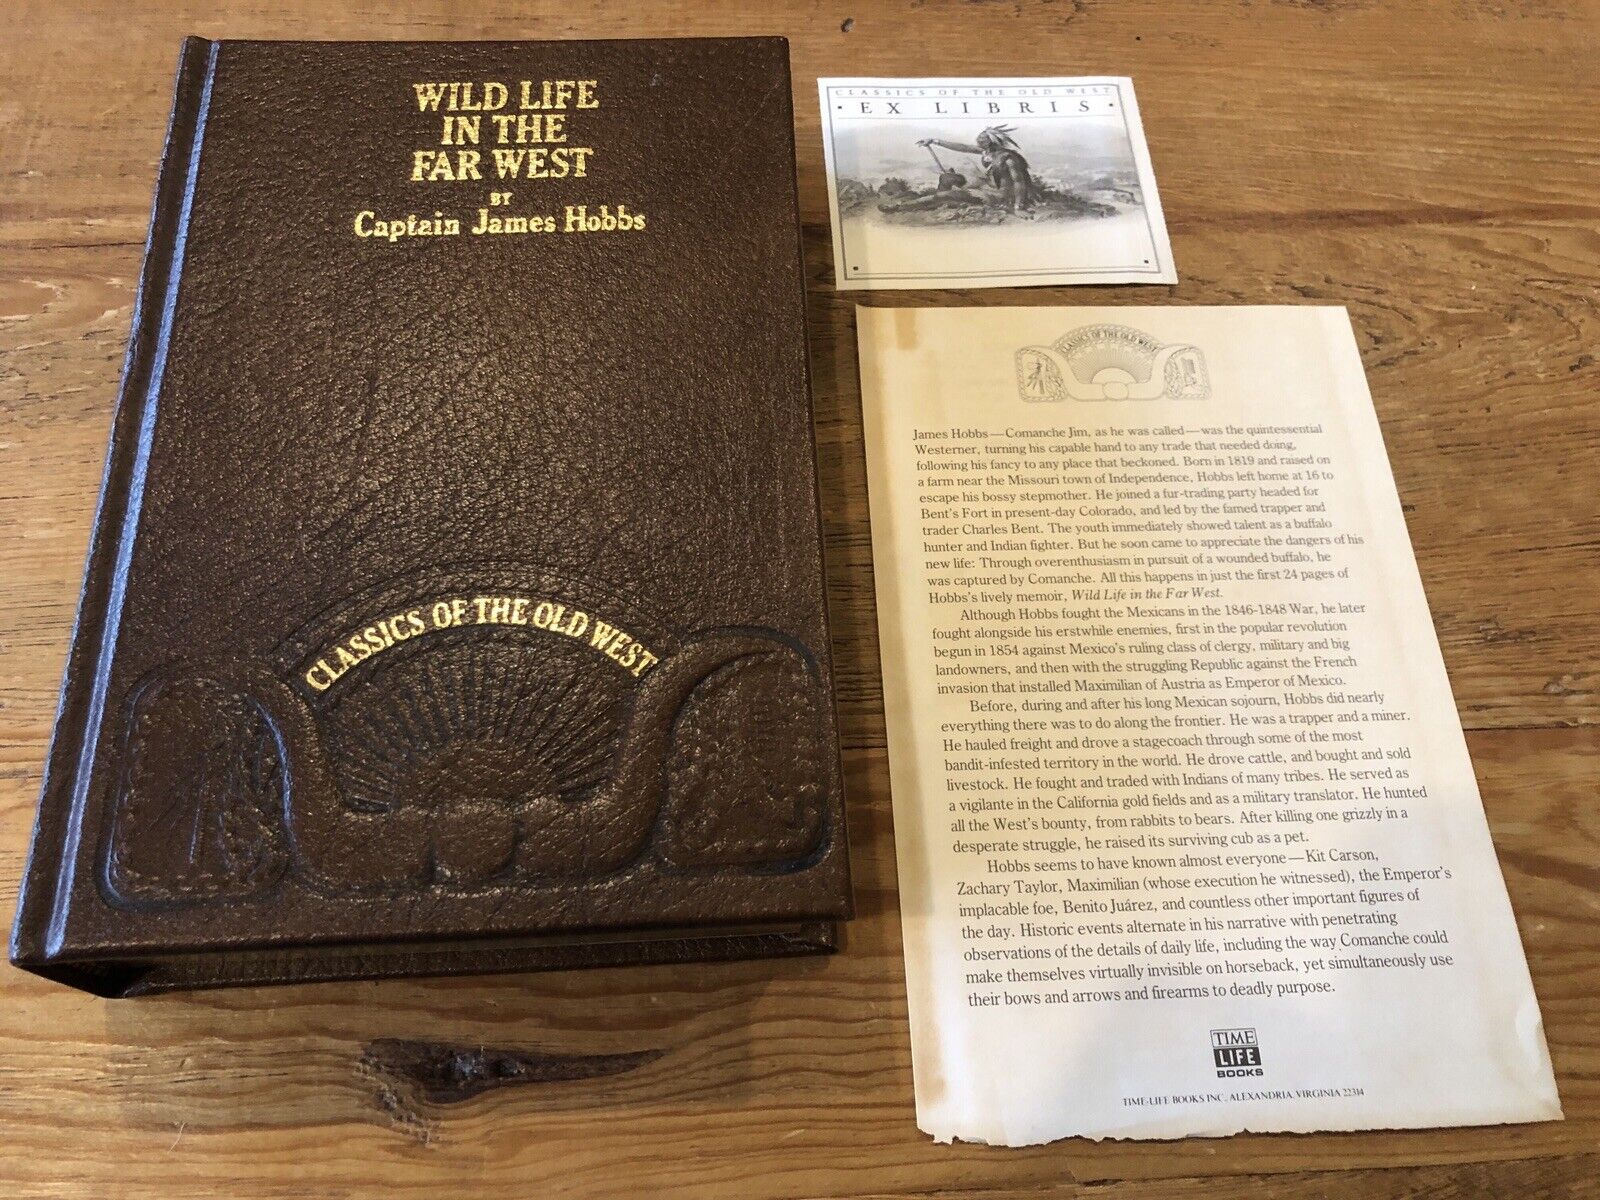 WILD LIFE IN THE FAR WEST BY HOBBS, LEATHER, CLASSICS OF THE OLD WEST